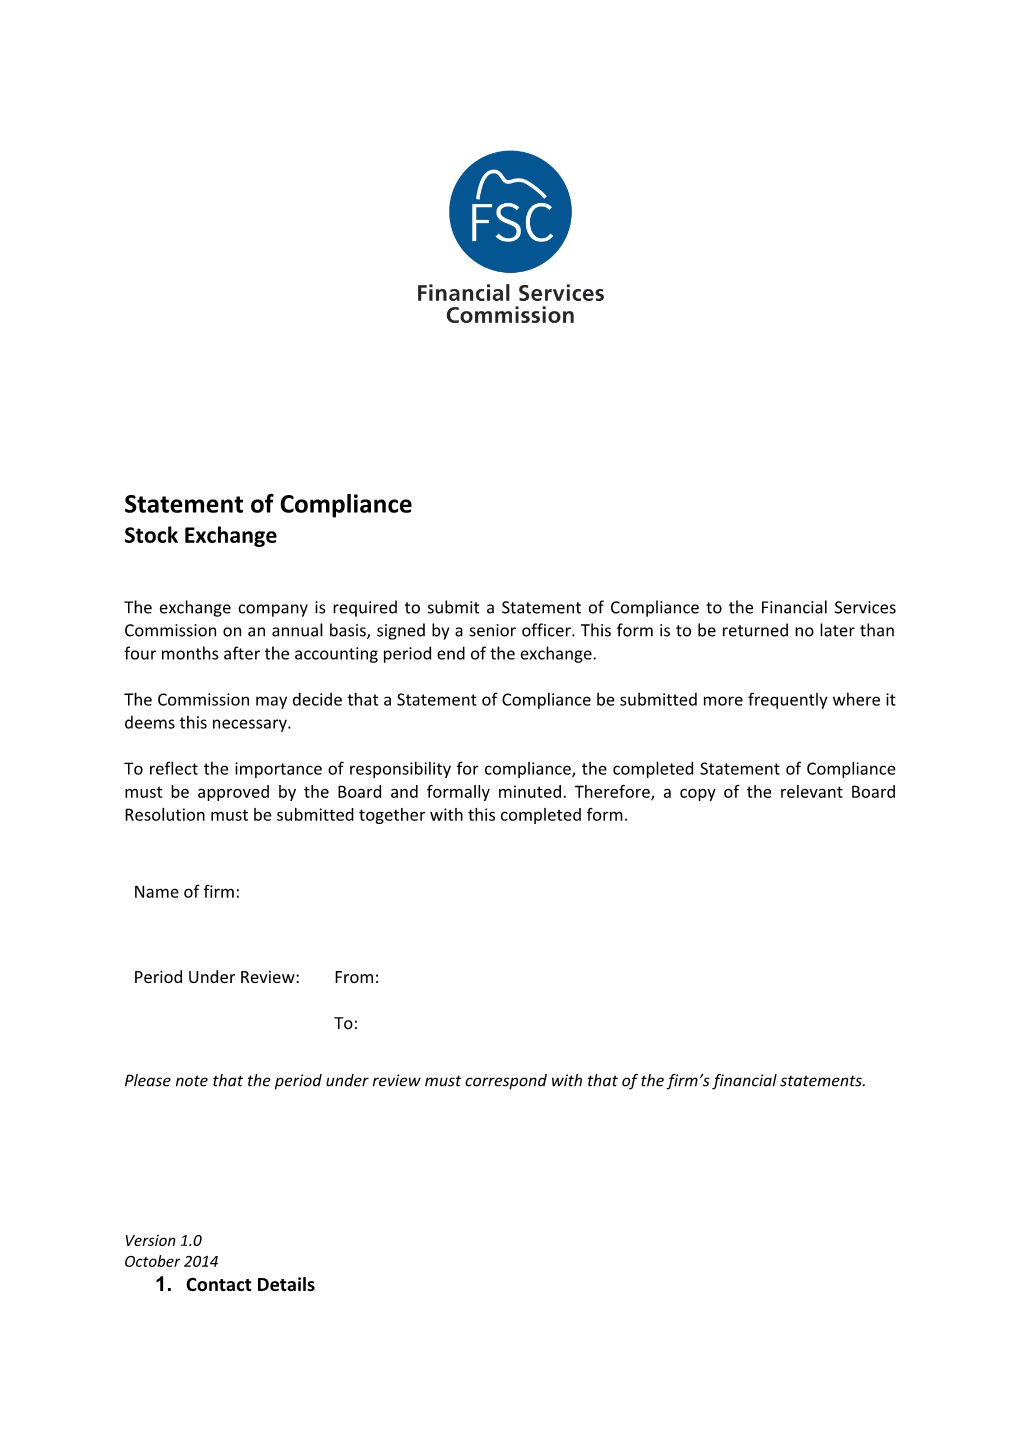 Statement of Compliance s1